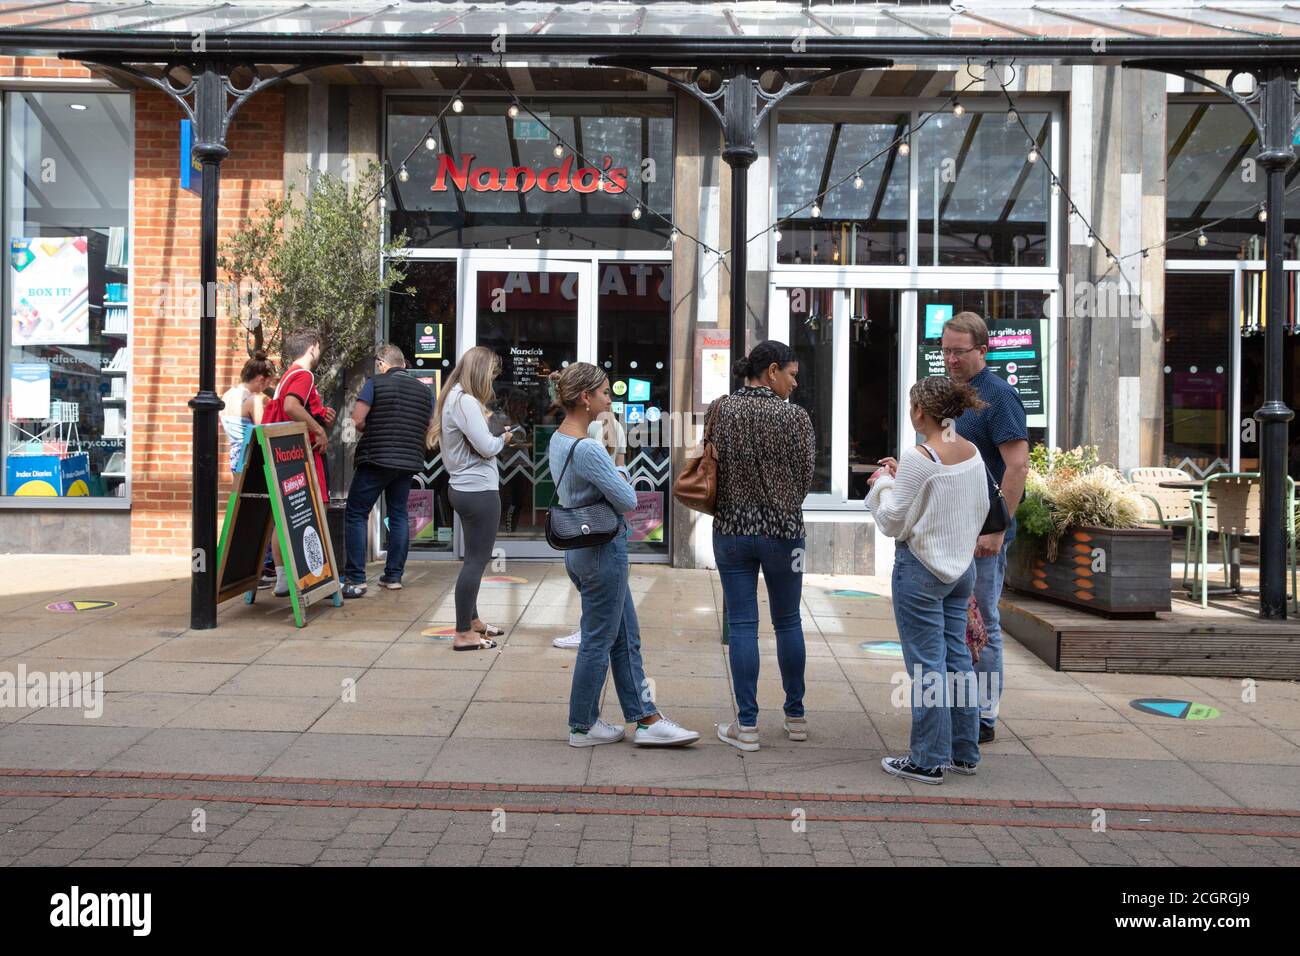 Sevenoaks,Kent,12th September 2020,People queue outside Nando's restaurant in Sevenoaks, Kent. The forecast is for 21C sunny intervals with a gentle breeze and is to continue with high temperatures for the next few days.Credit: Keith Larby/Alamy Live News Stock Photo